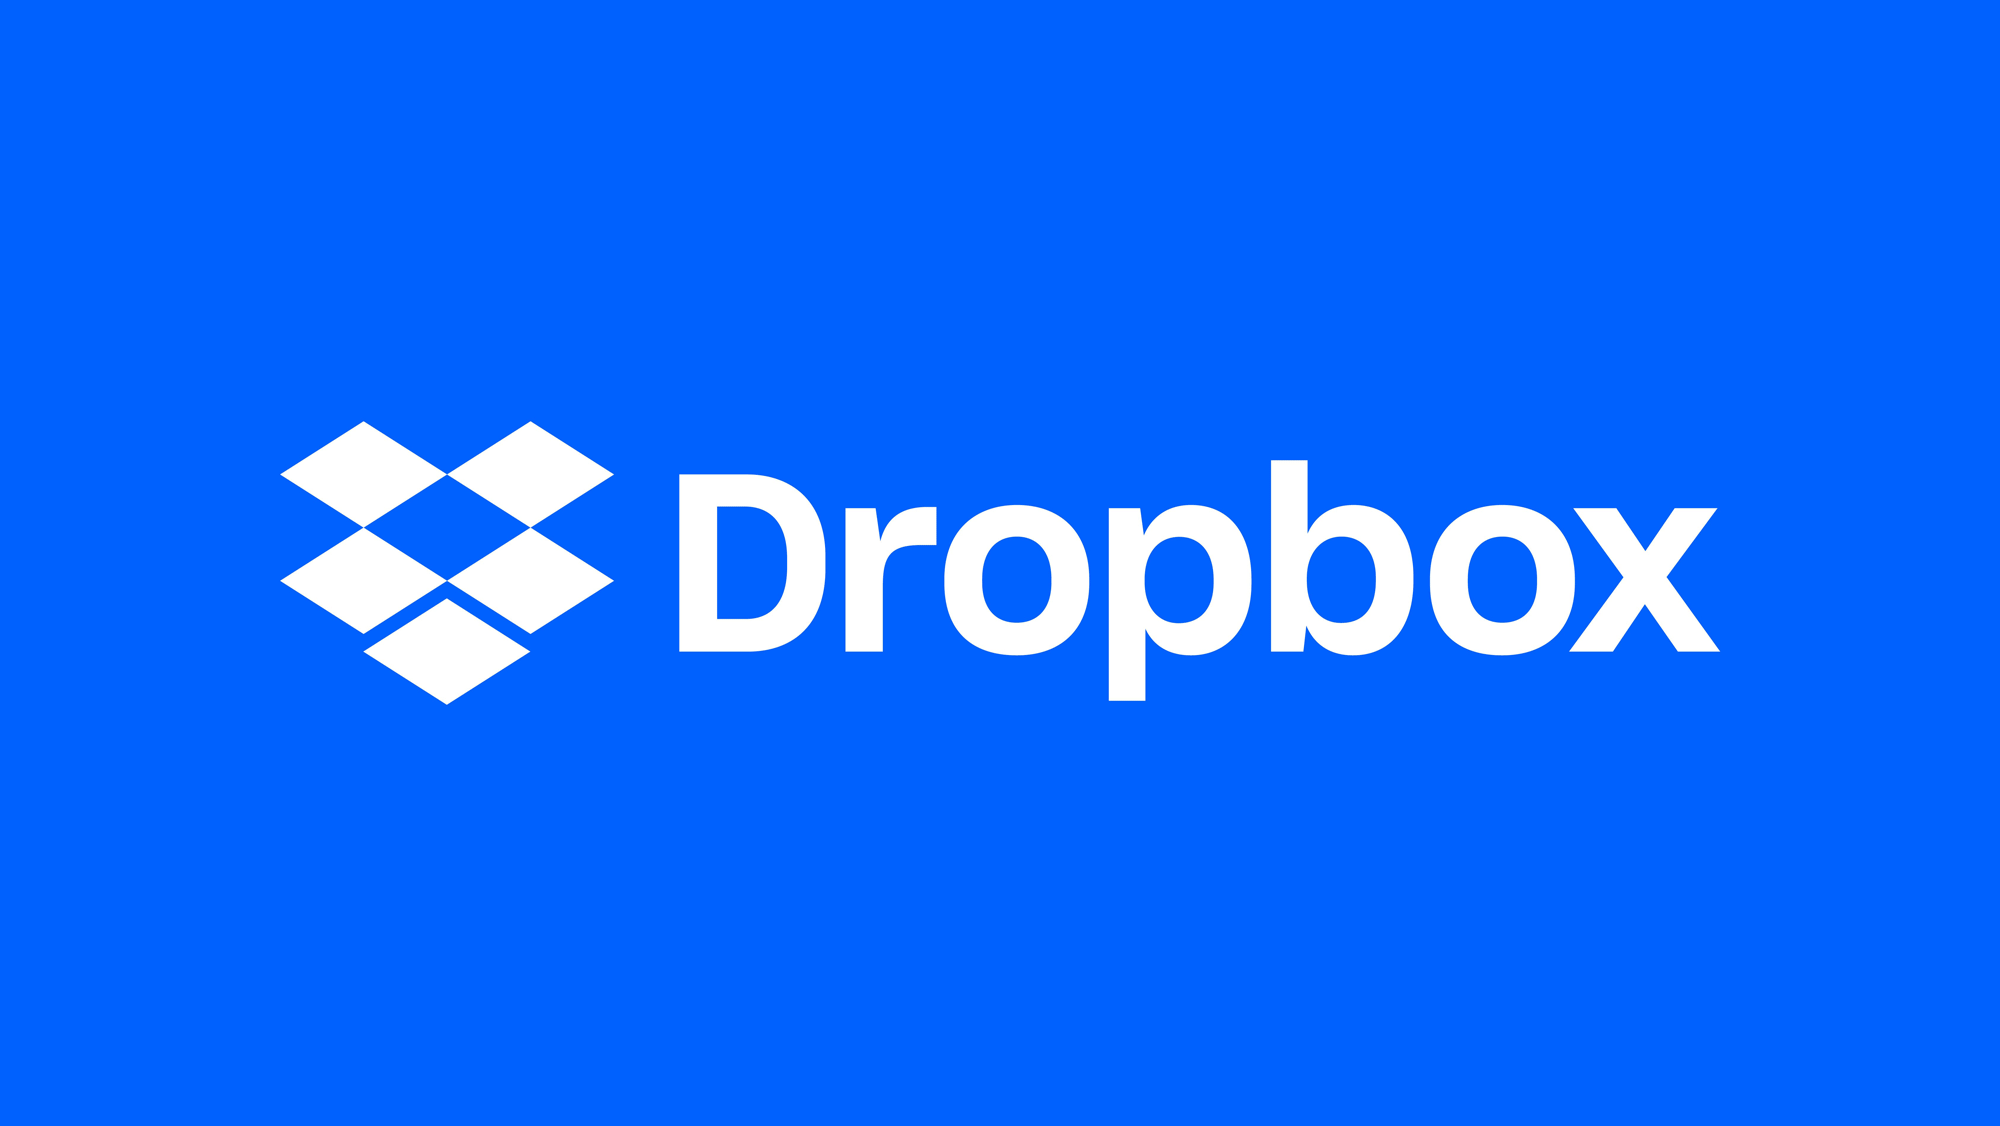 what color is the dropbox logo